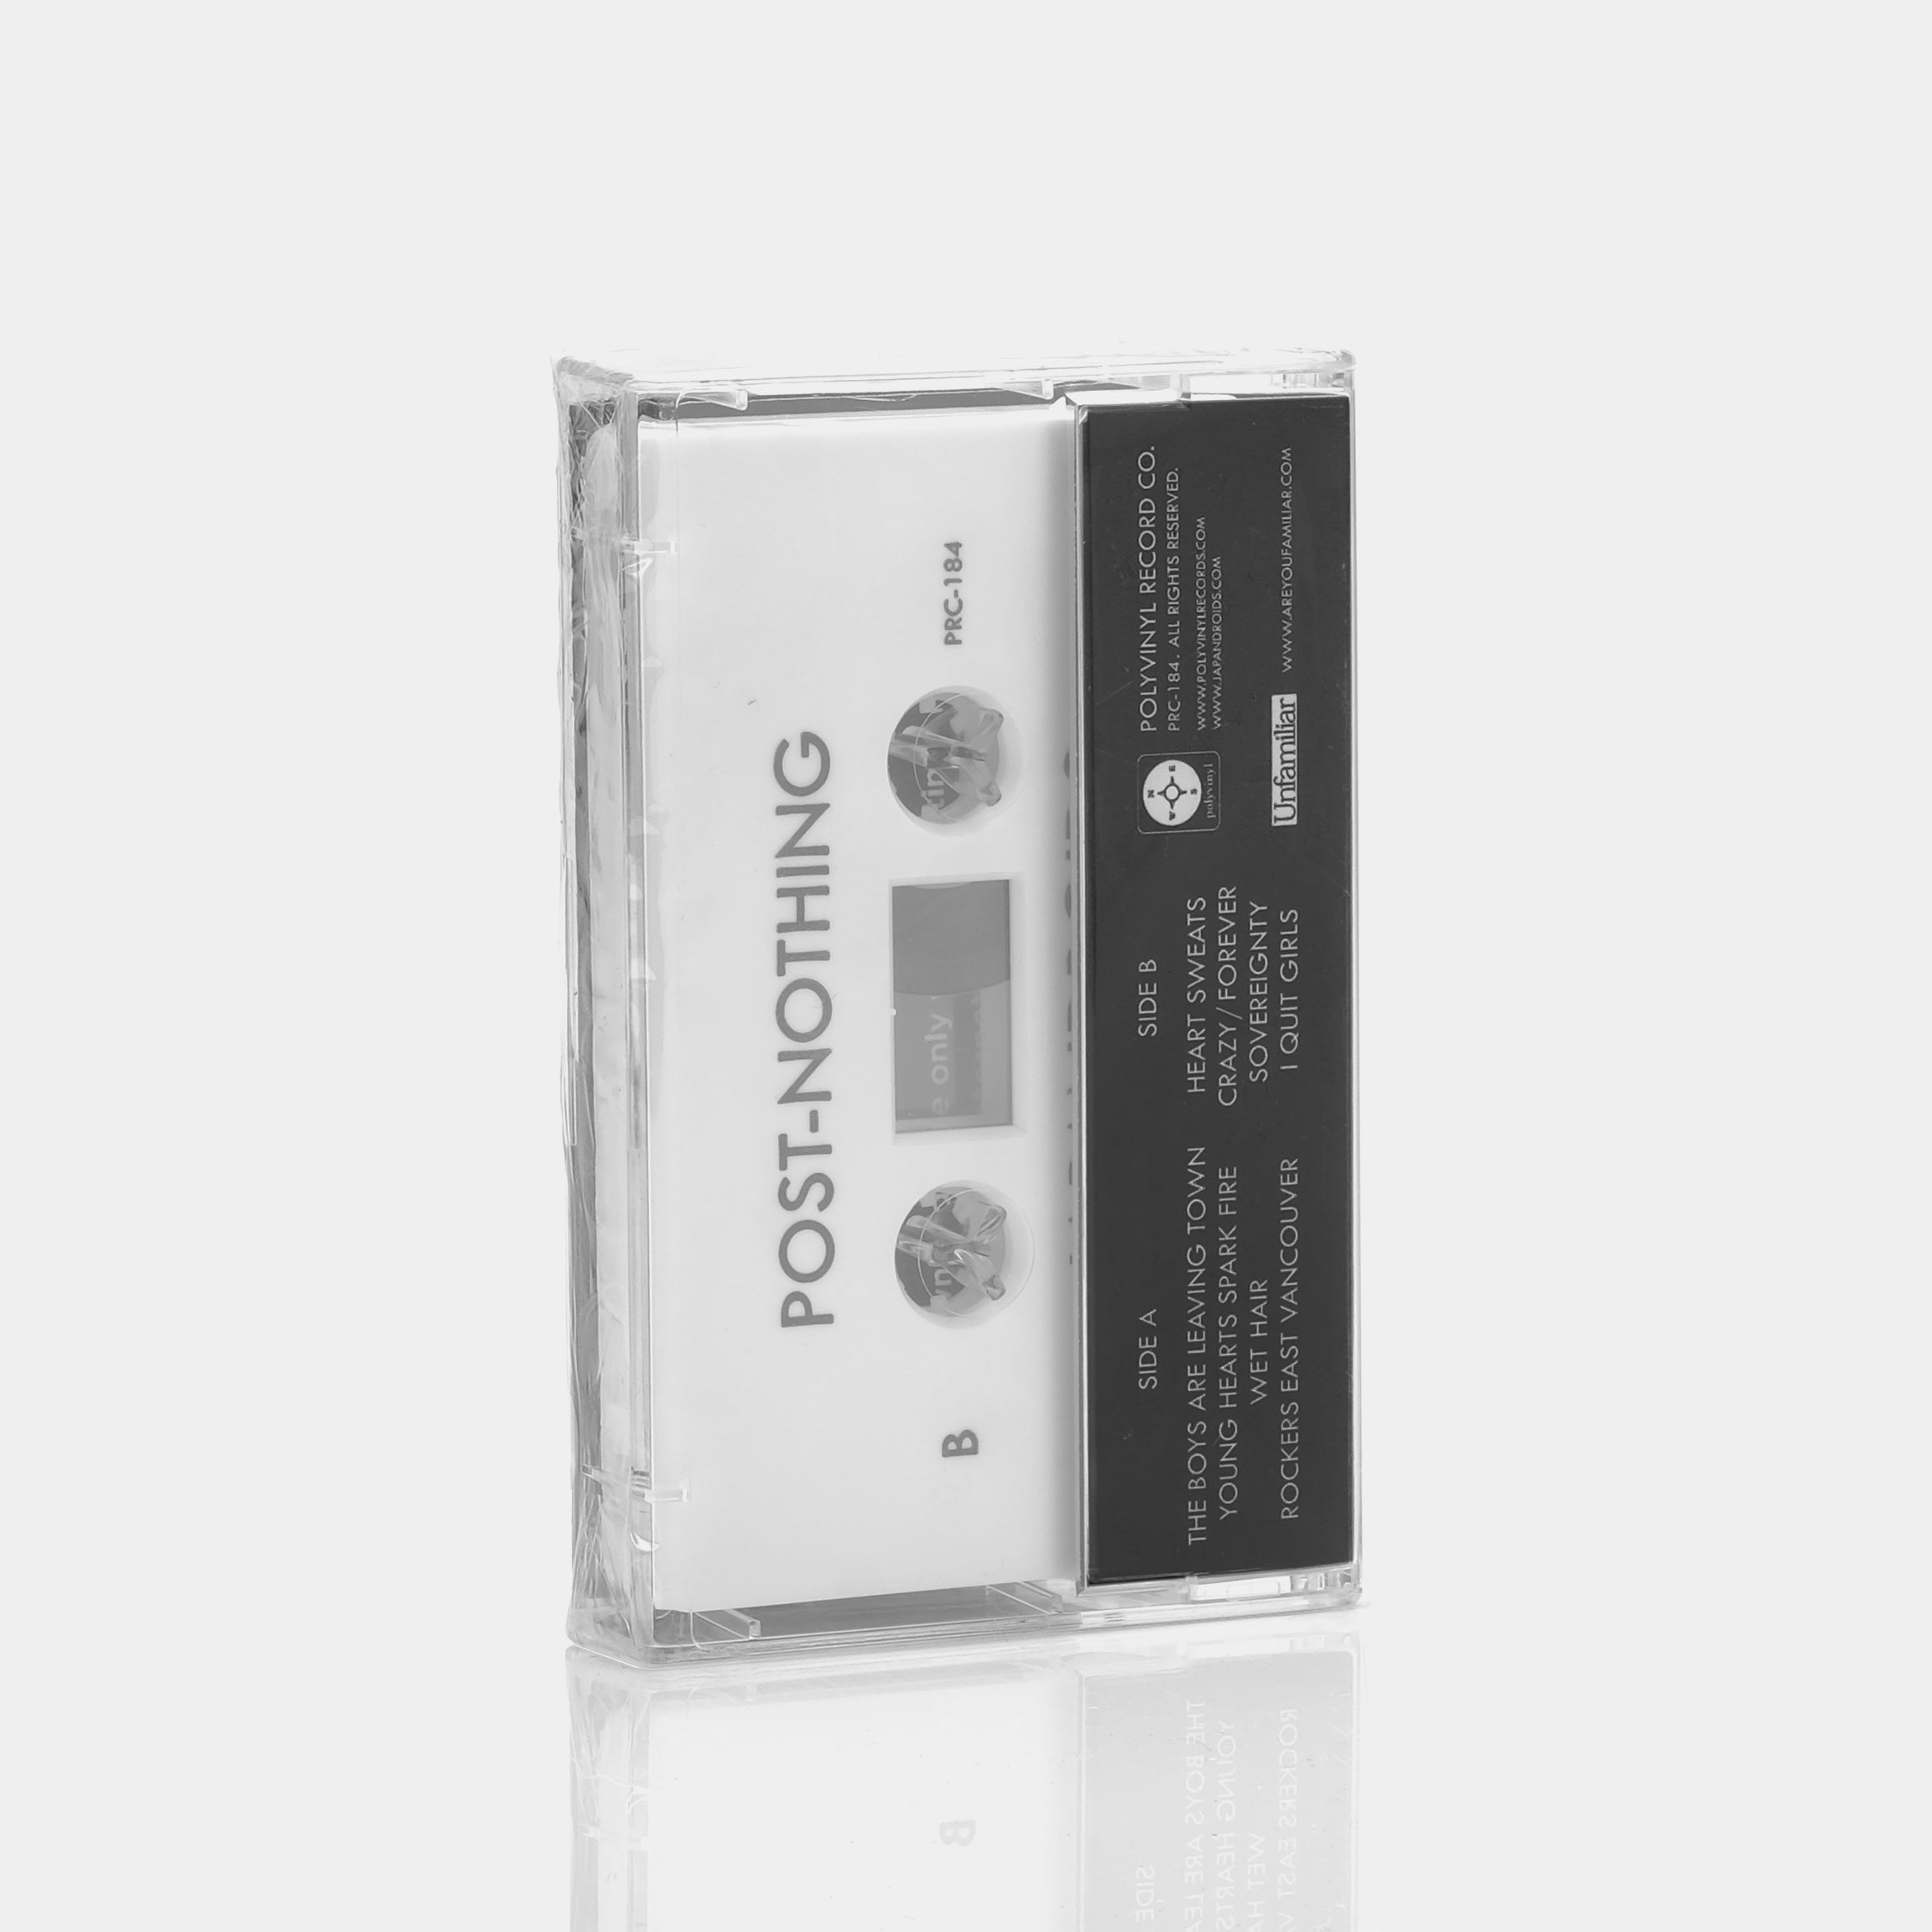 Japandroids - Post-Nothing Cassette Tape